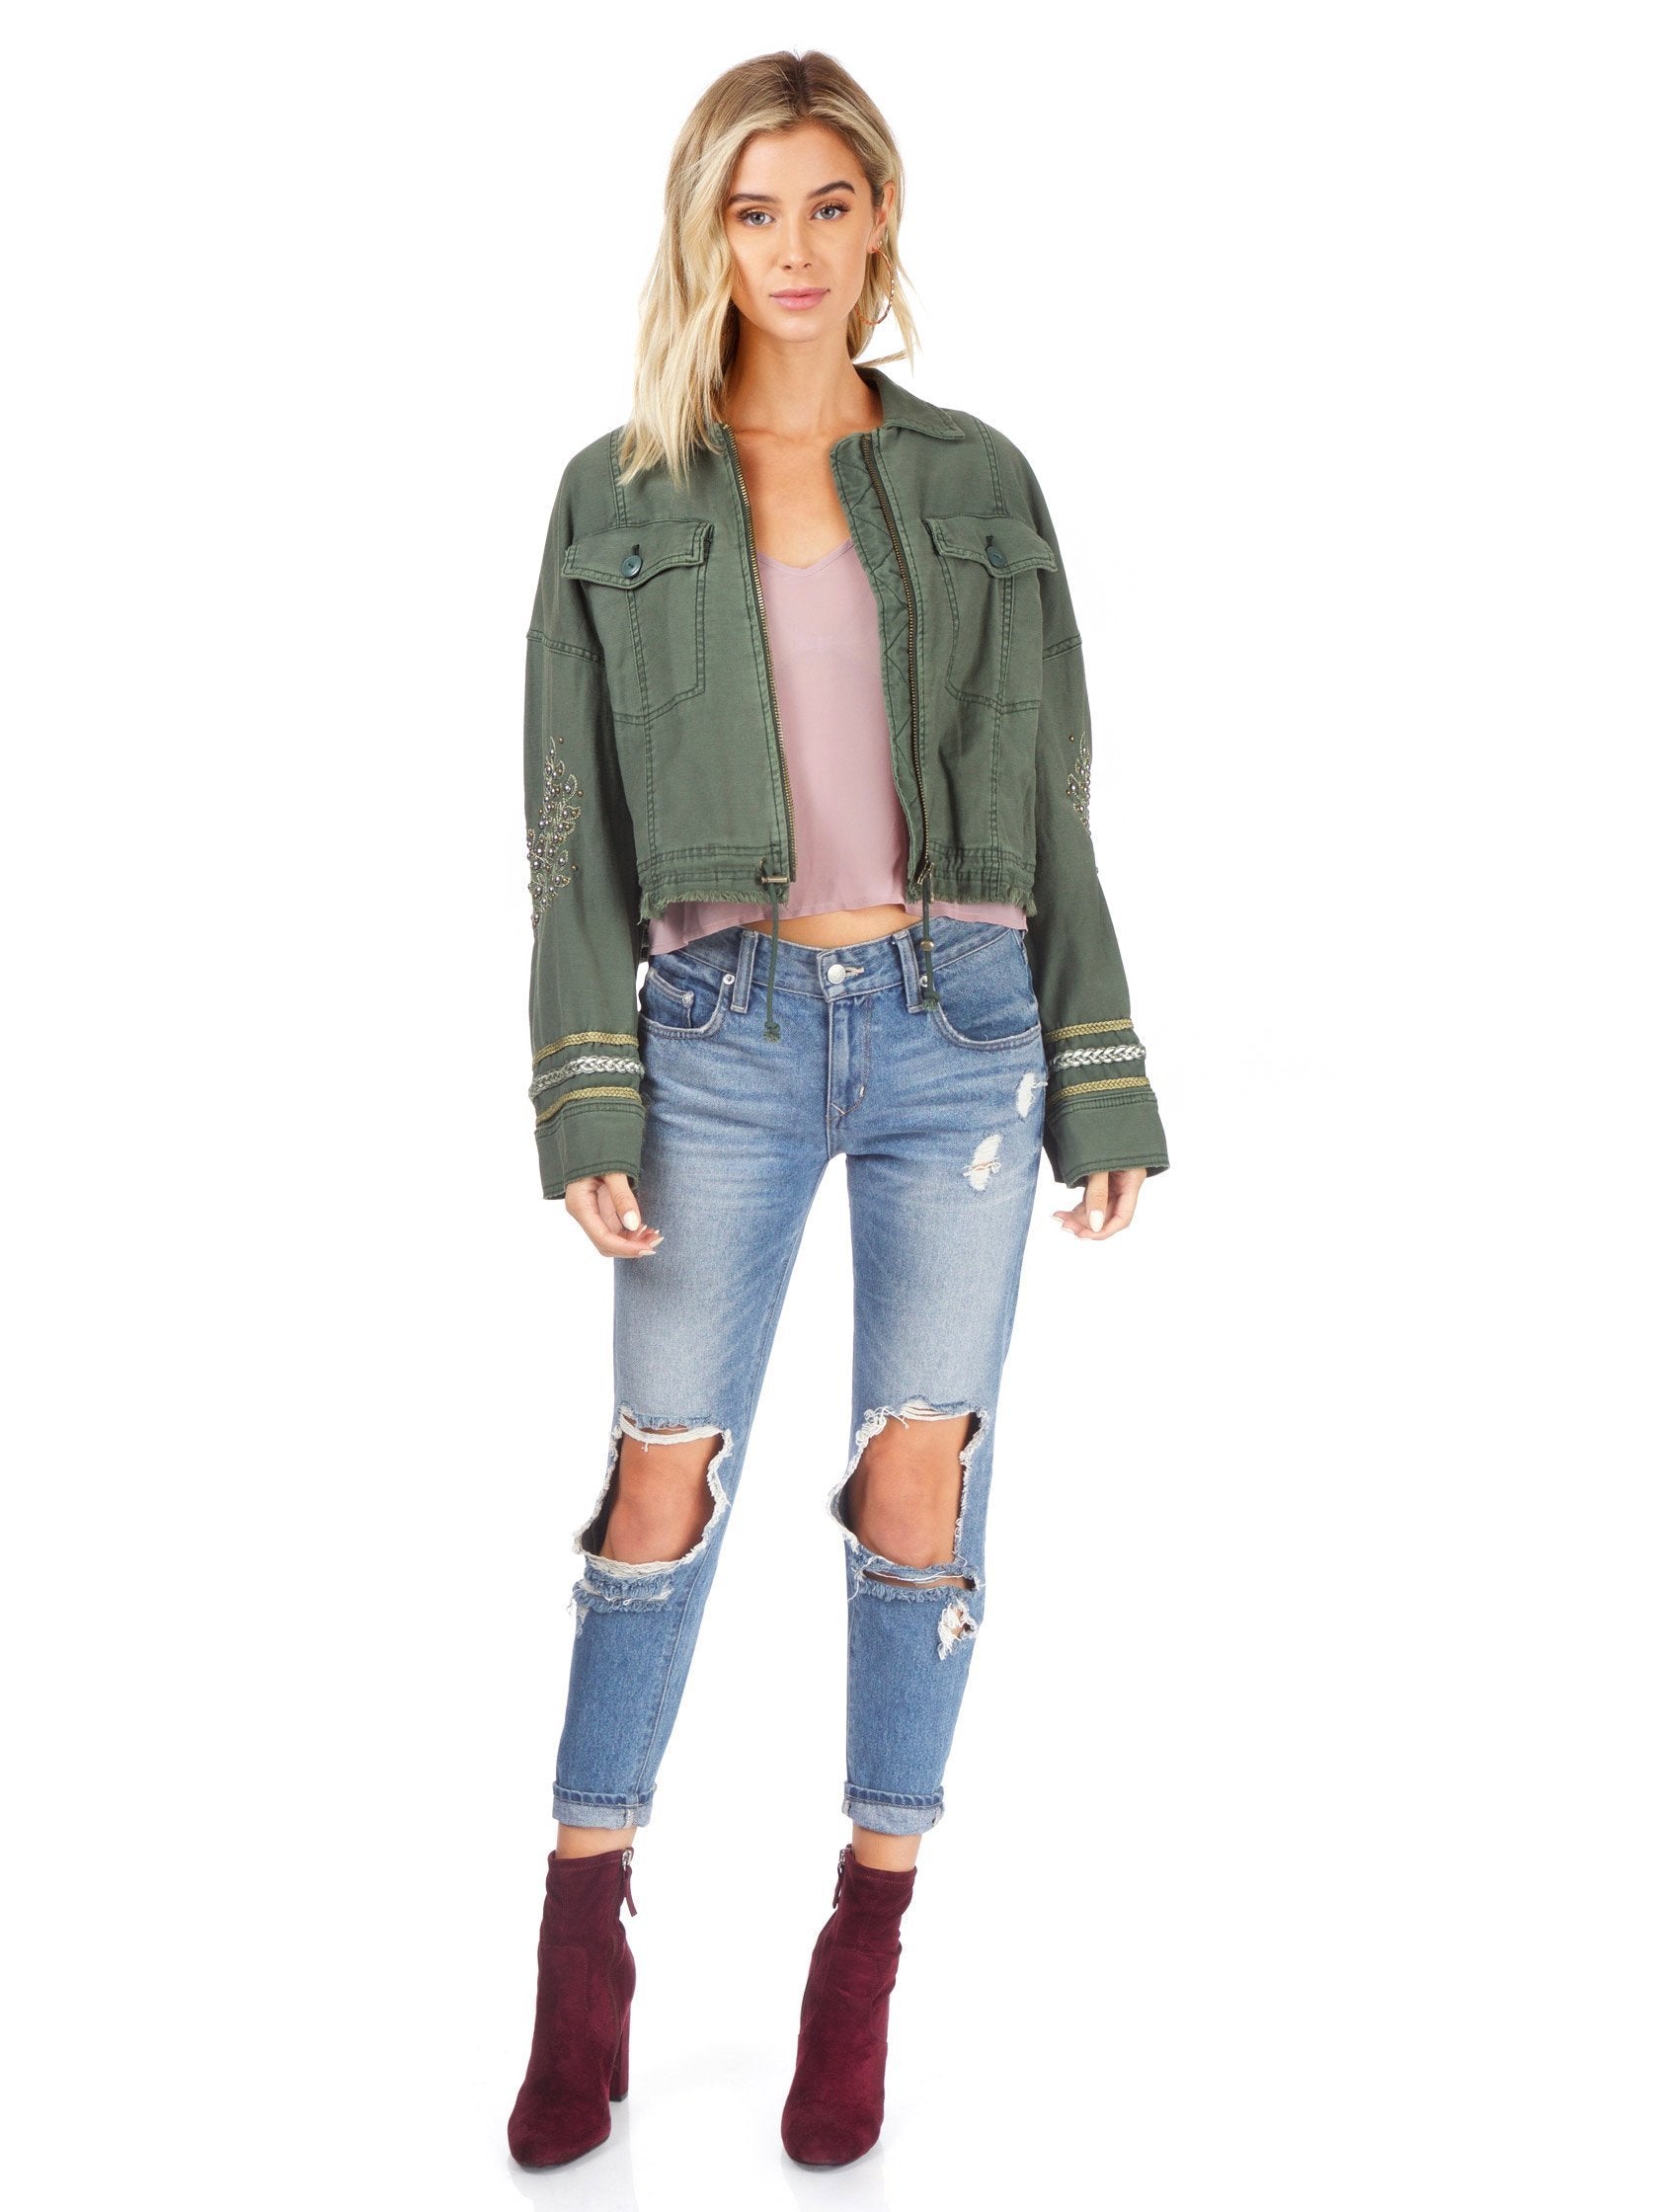 Girl wearing a jacket rental from Free People called Extreme Cropped Military Jacket